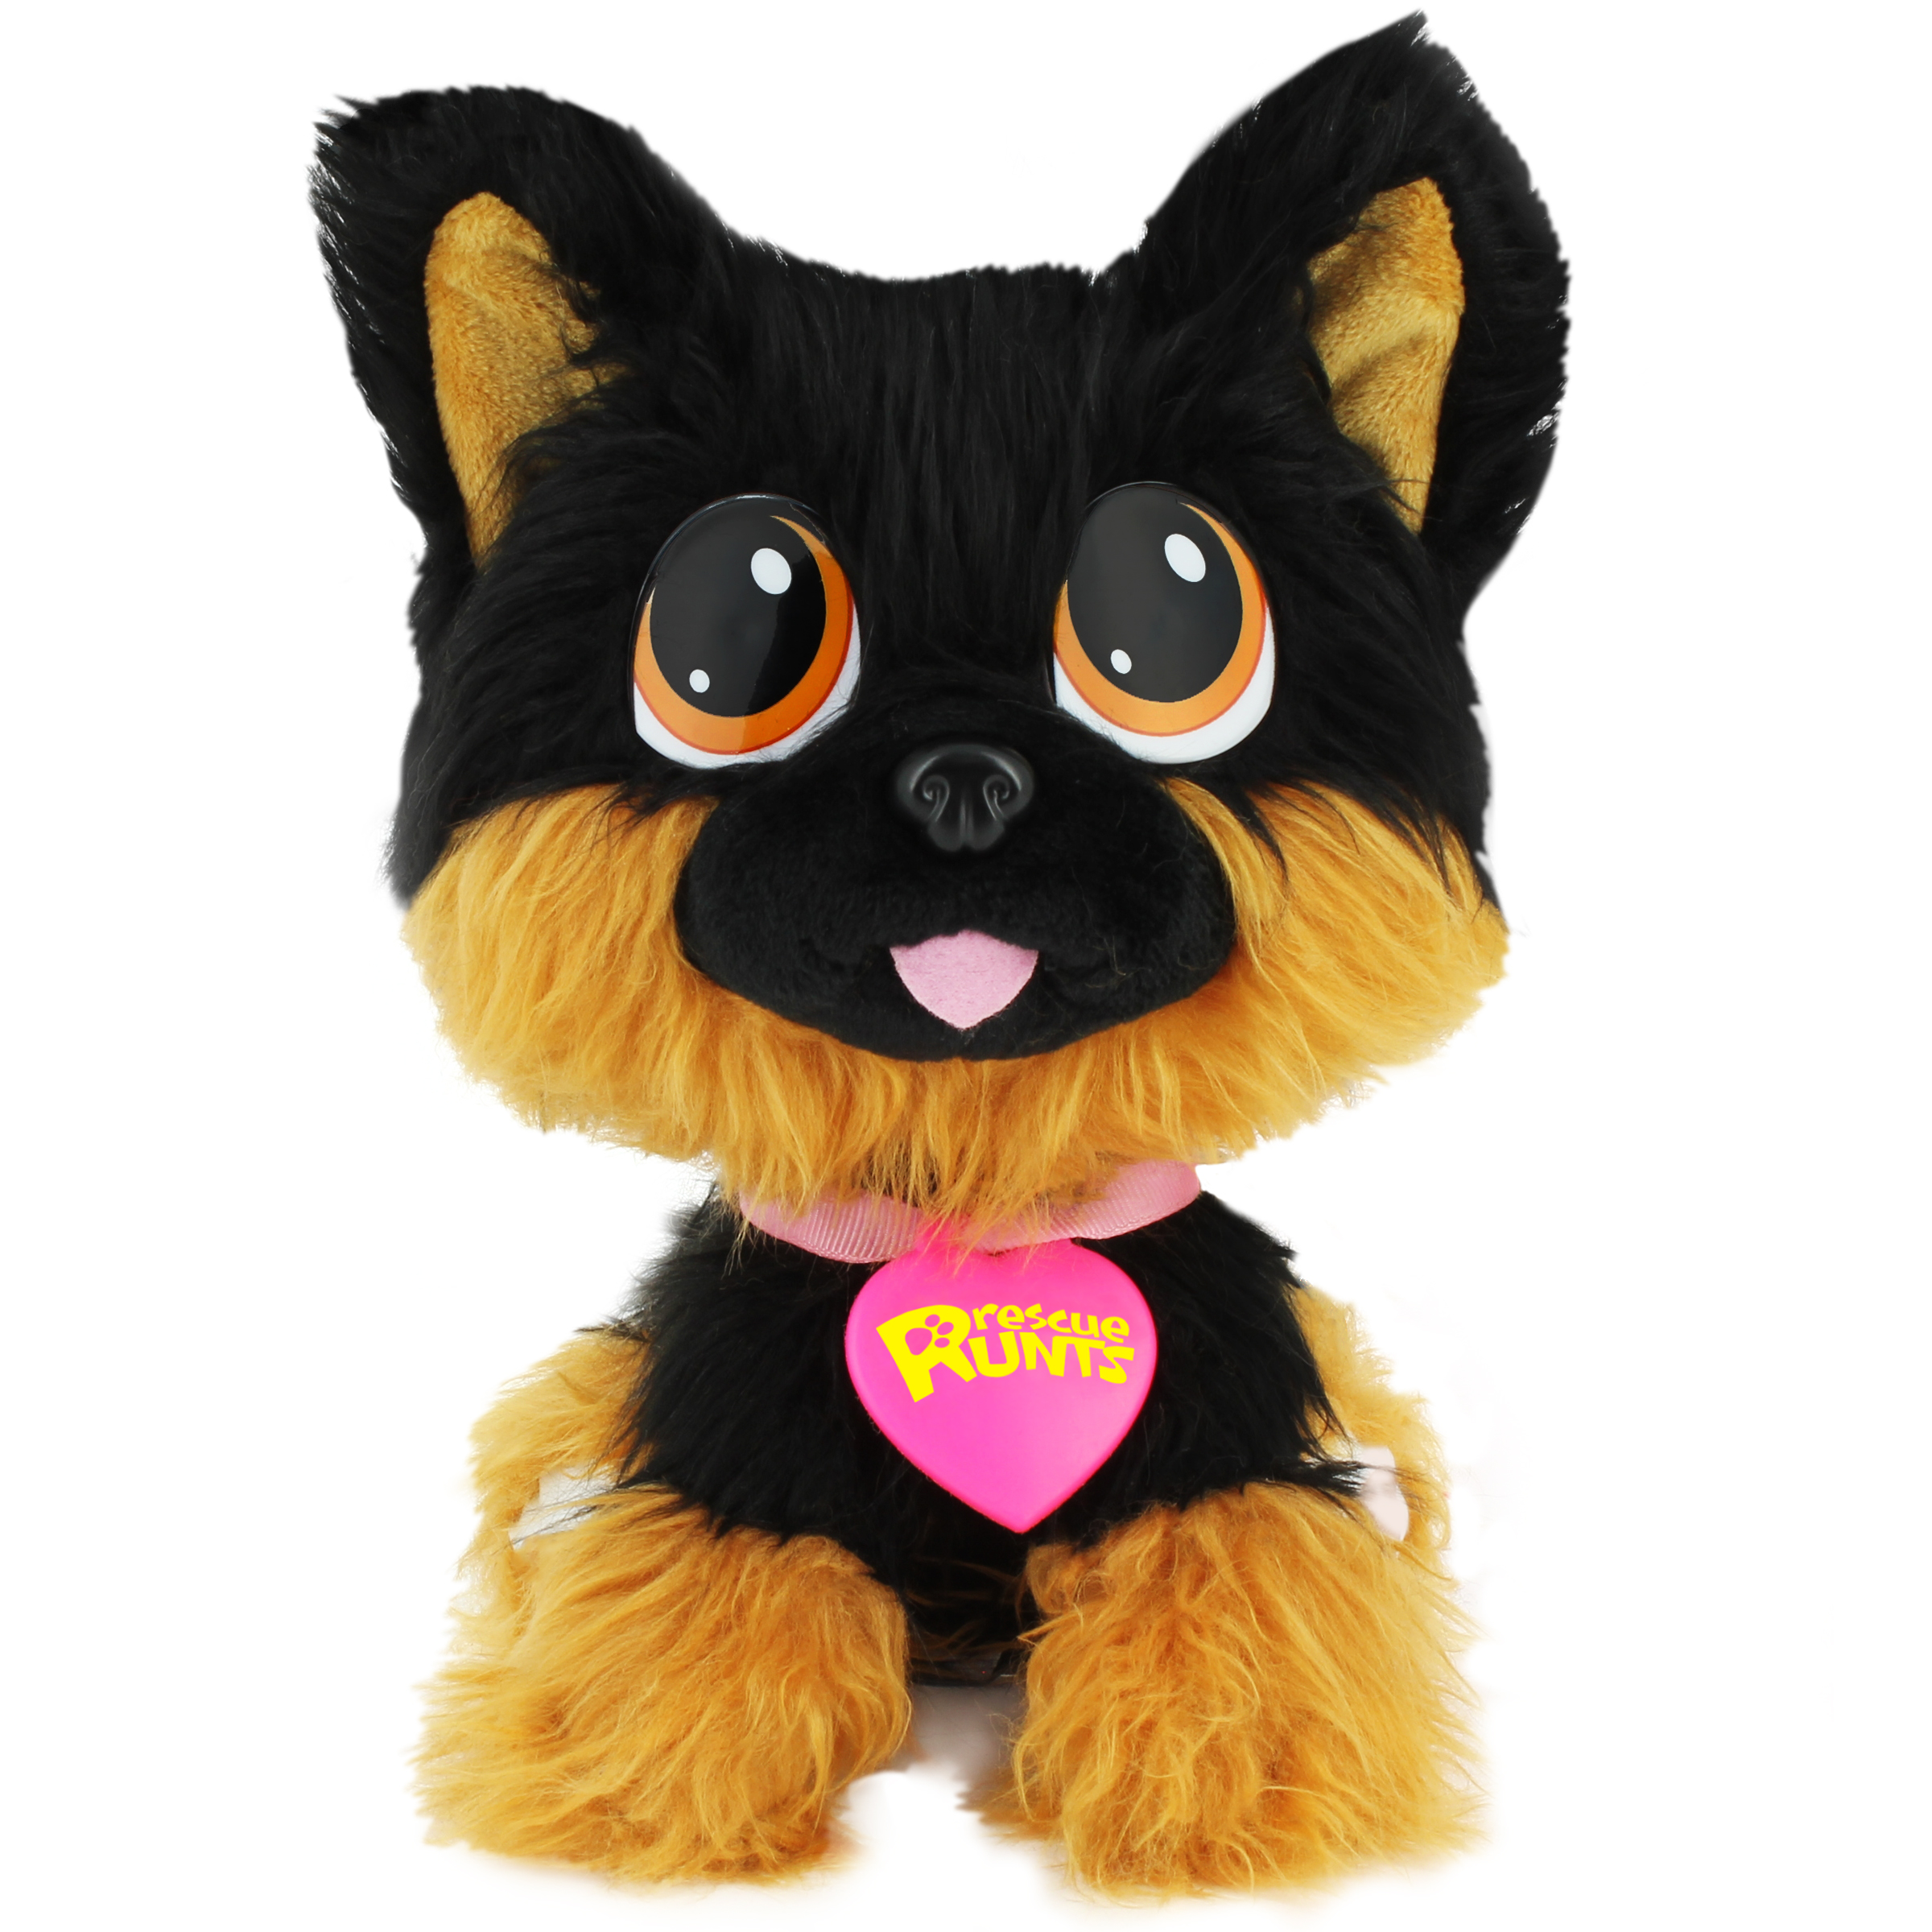 Rescue runts shepherd rescue dog plush by kd kids - image 6 of 8